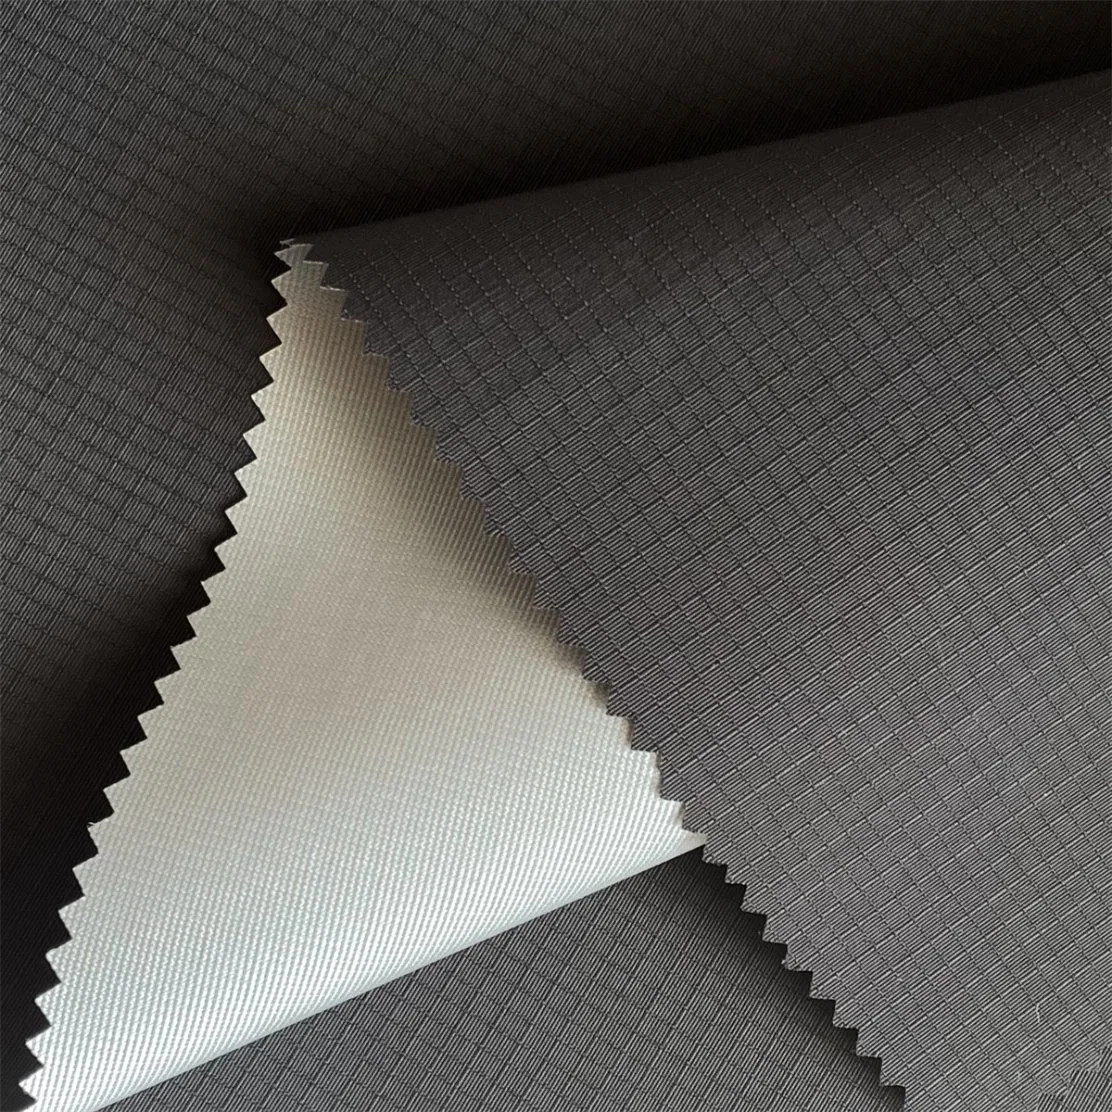 Three-in-One Compound Nylon Taslon Fabric for Outdoor Wear